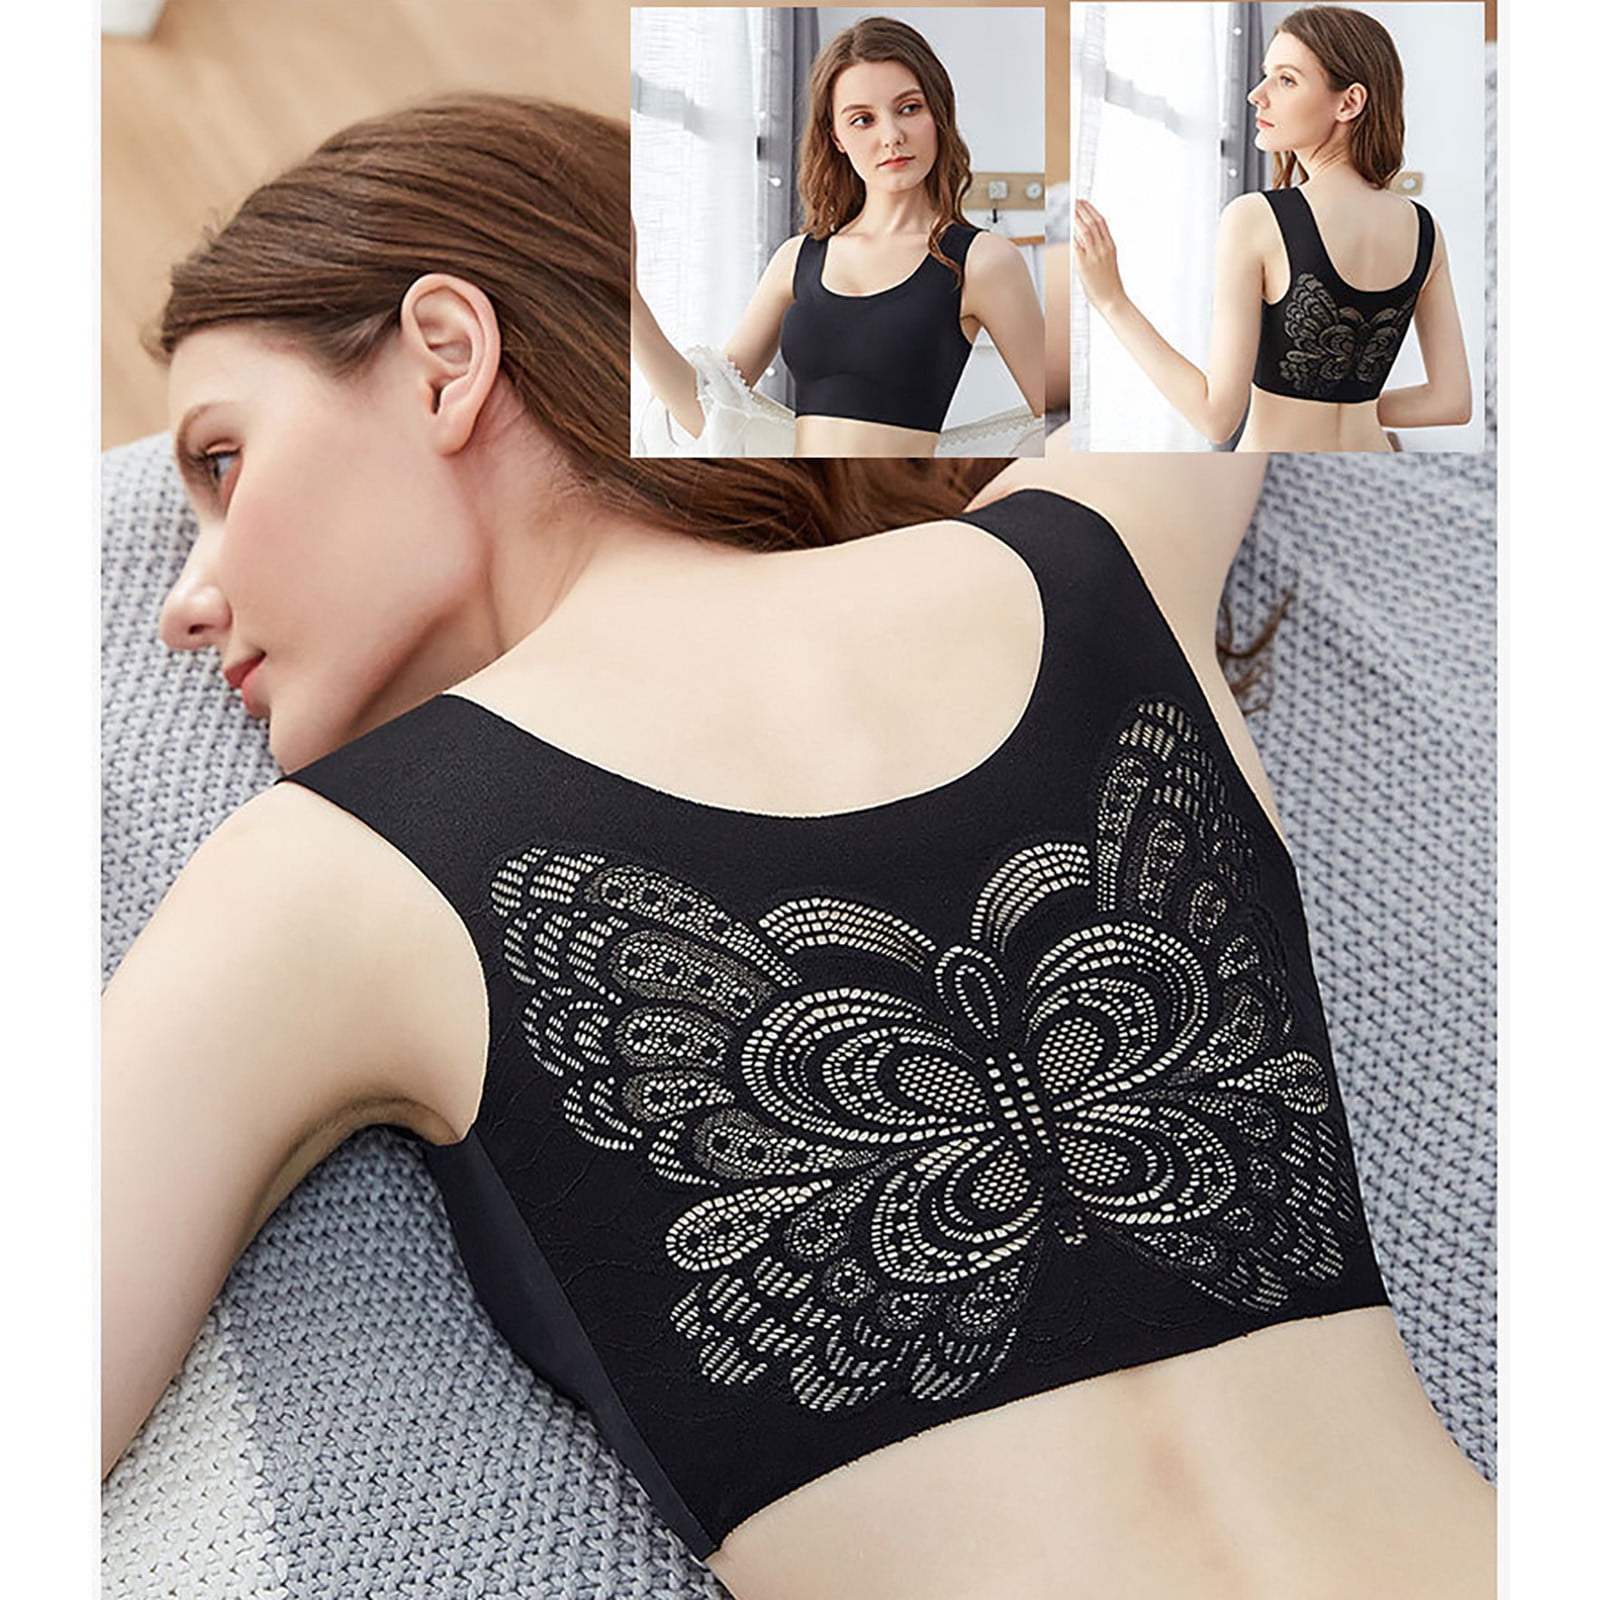 Yoga Tops With Built In Bra Ukc